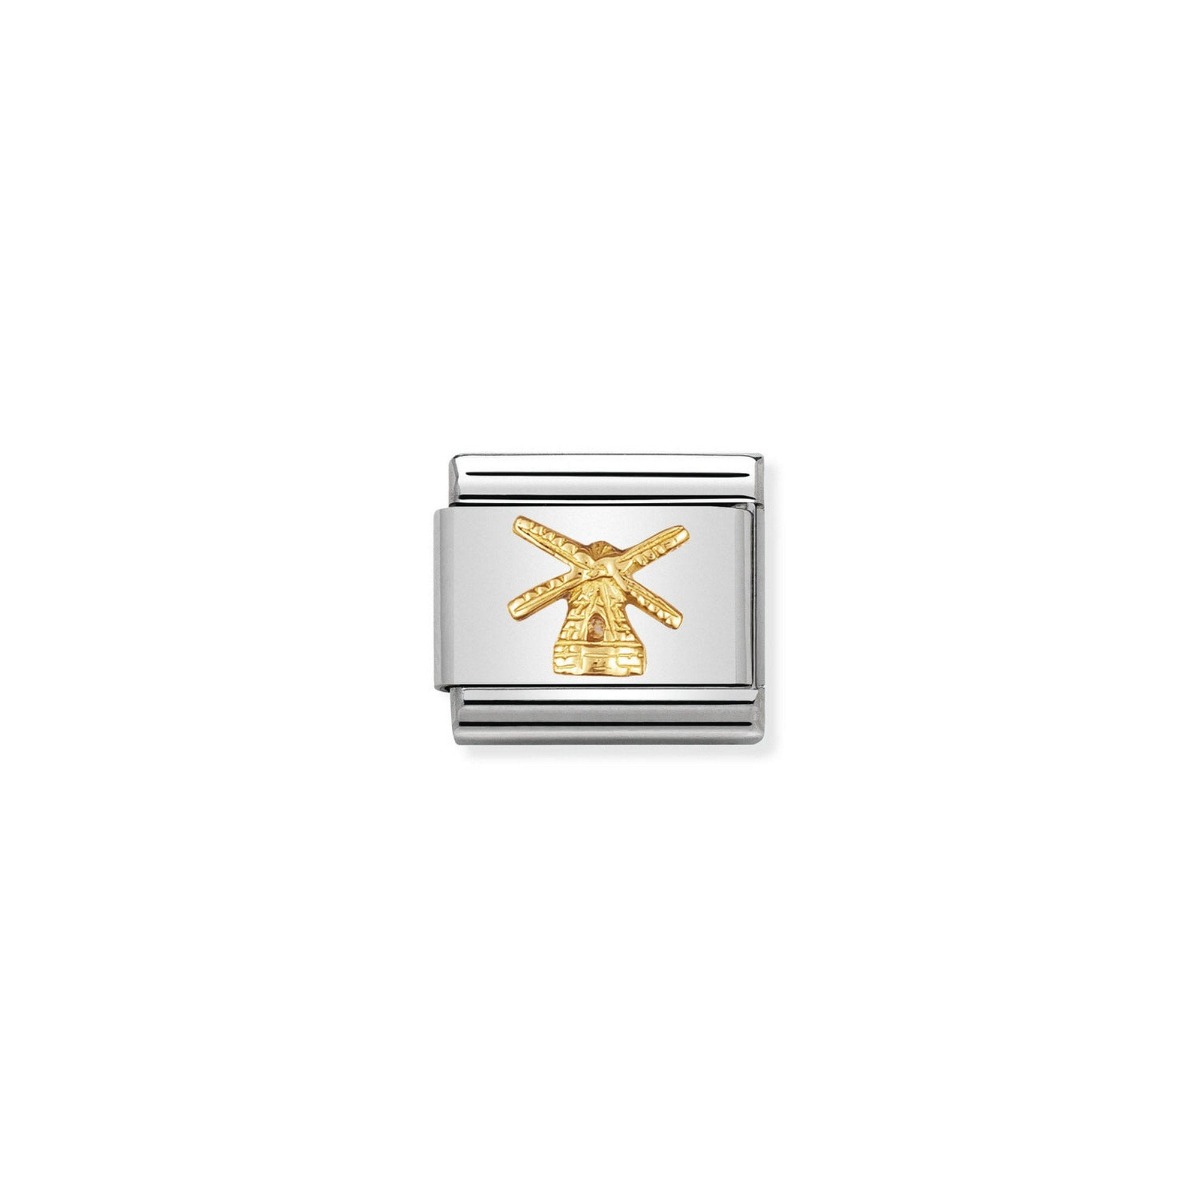 Nomination Classic Gold Monuments Windmill Charm 030123_03